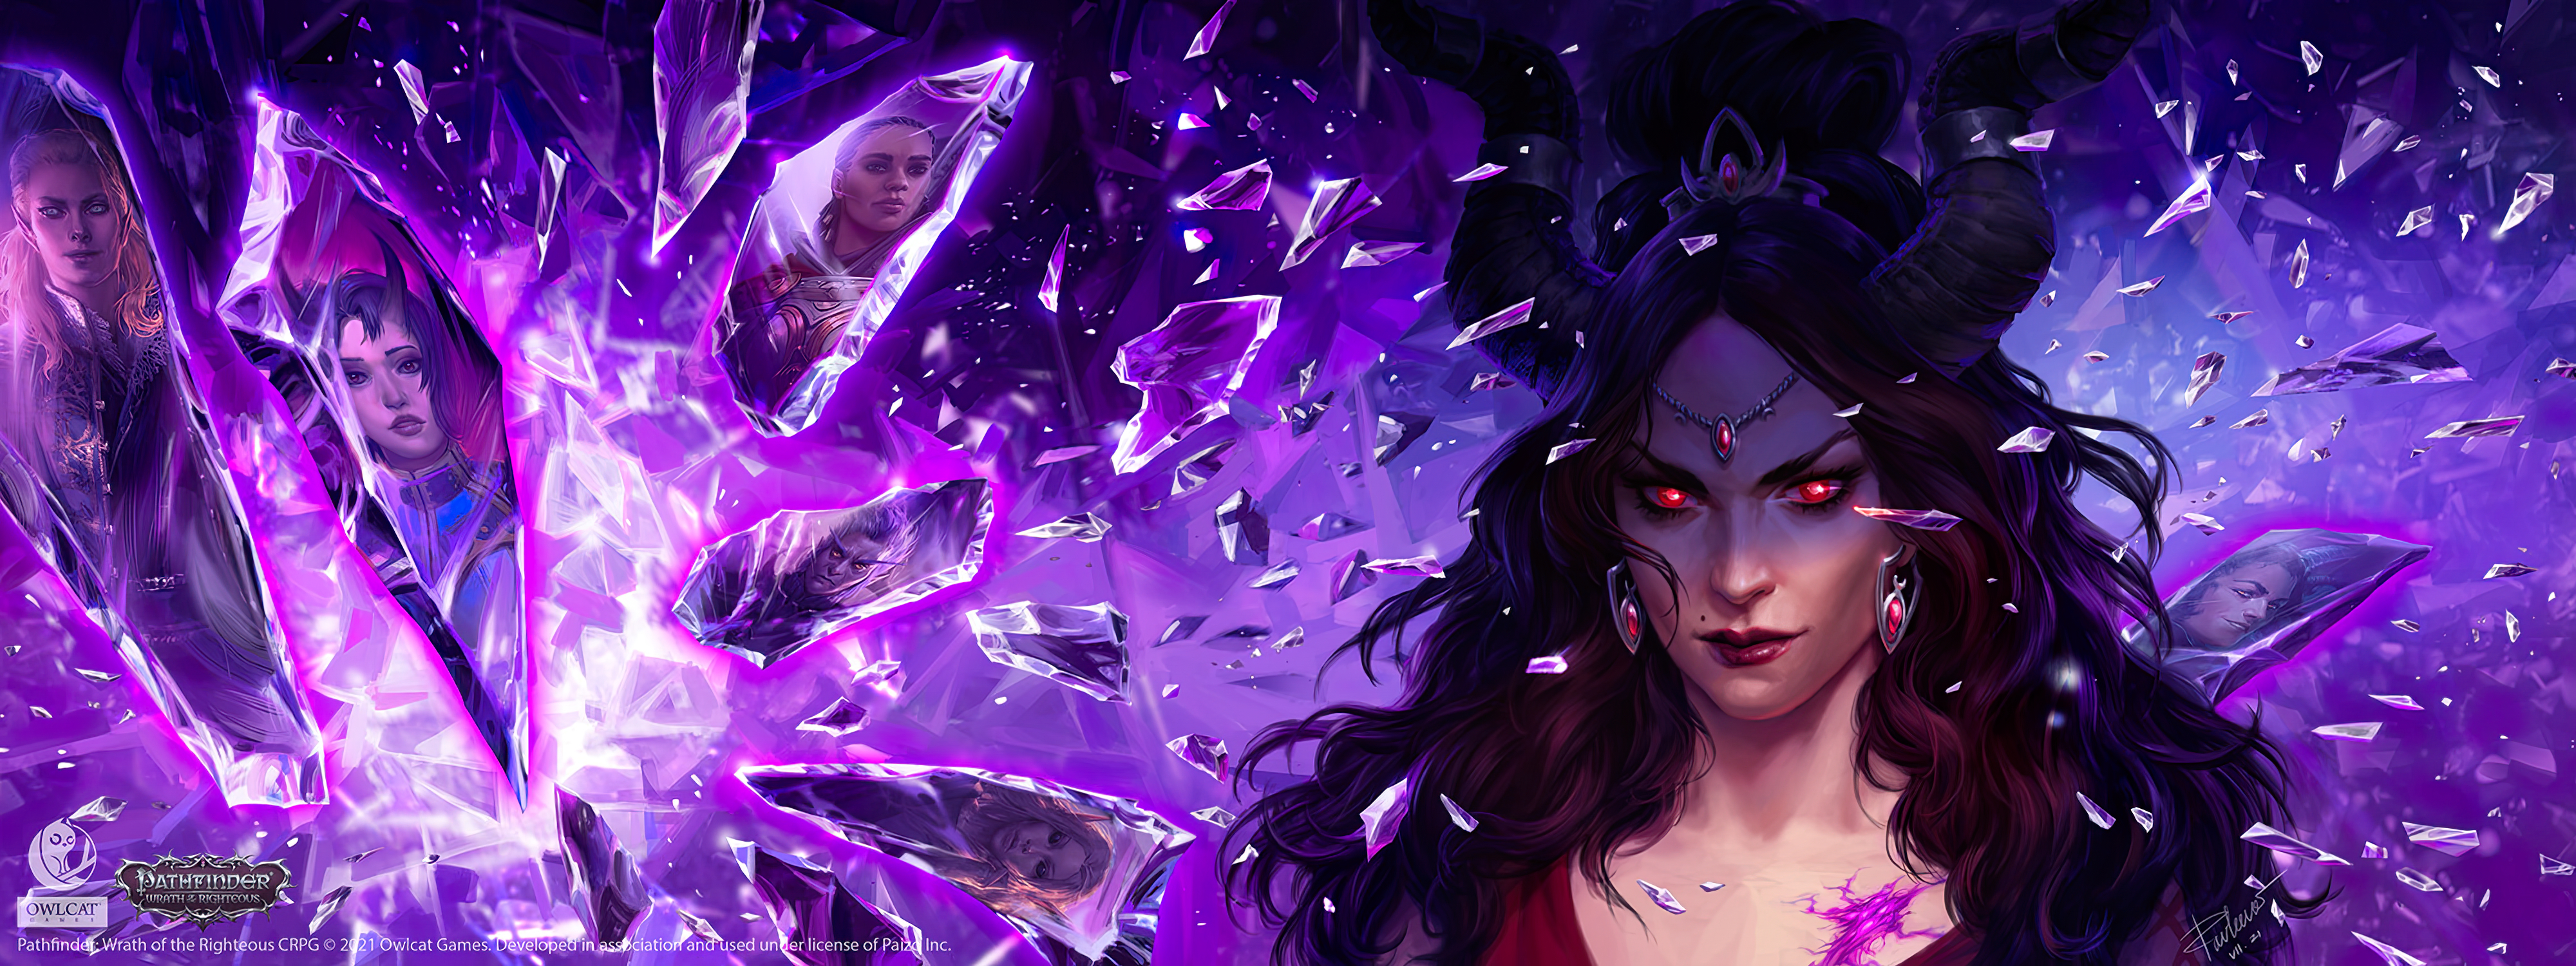 HD desktop wallpaper featuring a mystical character from Pathfinder: Wrath of the Righteous, surrounded by vibrant purple crystals.